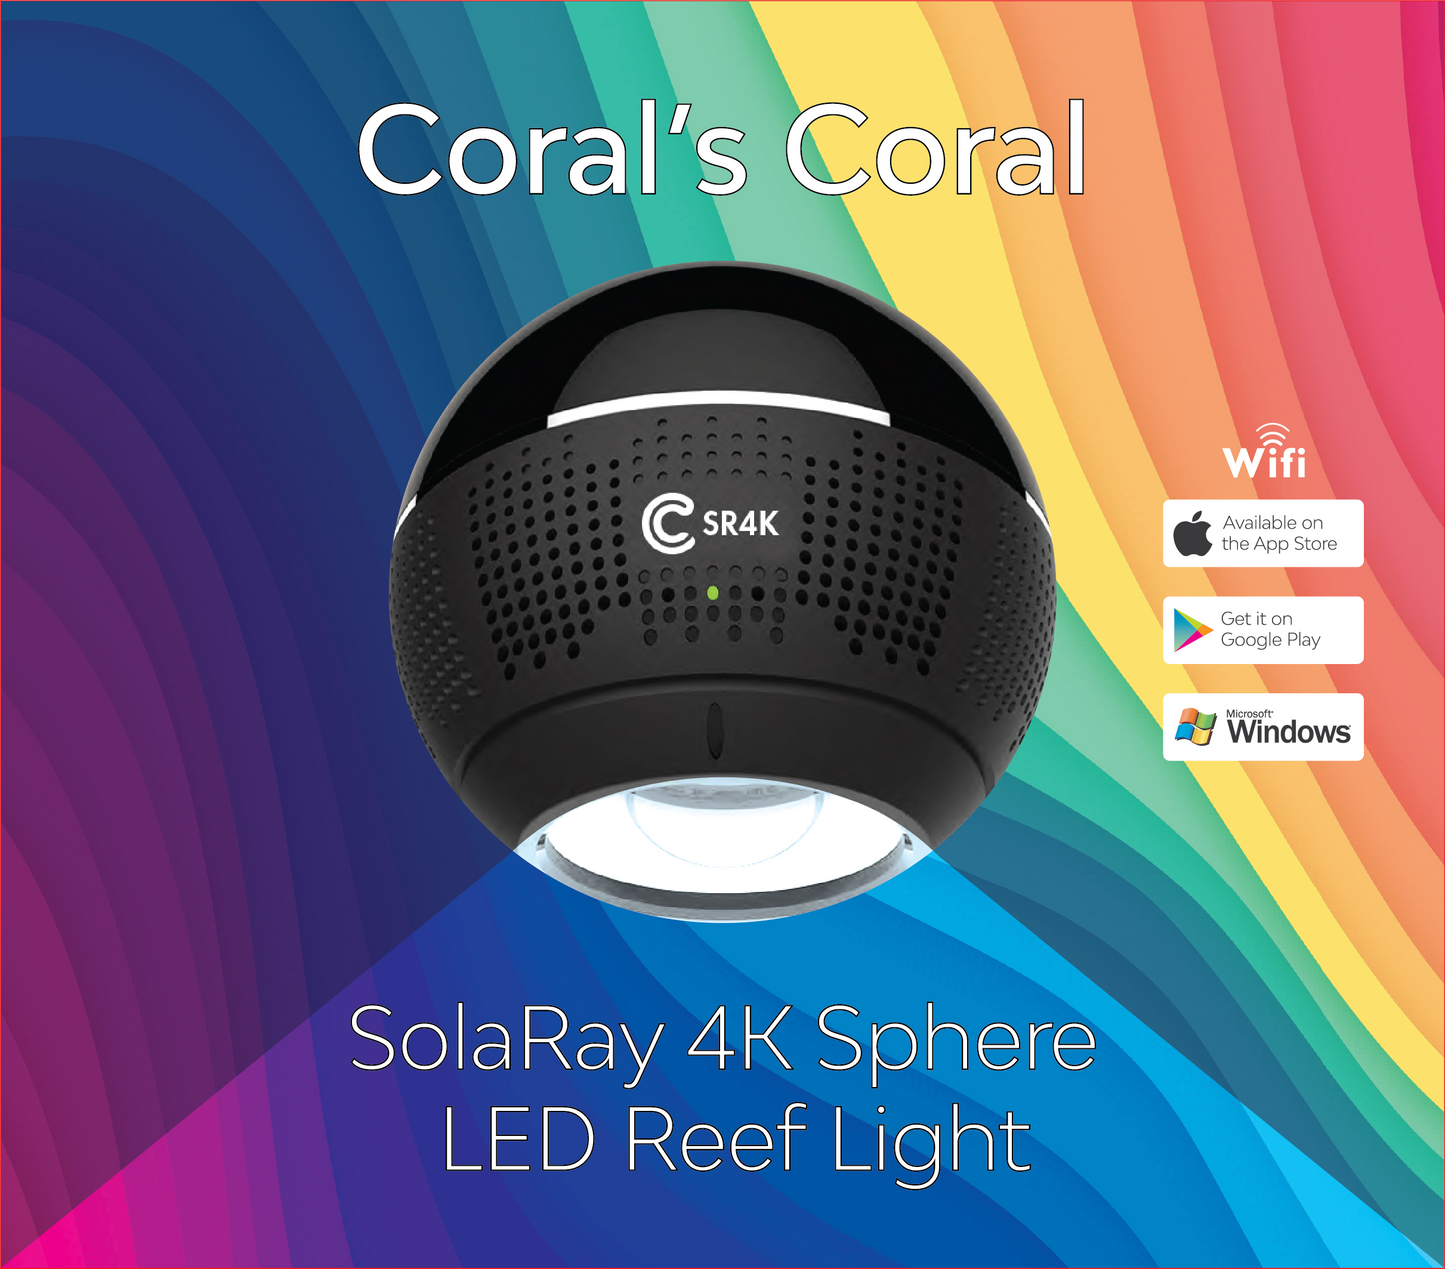 NOW SHIPPING! Coral's Coral SolaRay 4k Sphere LED Reef Aquarium Light - Coral's Coral